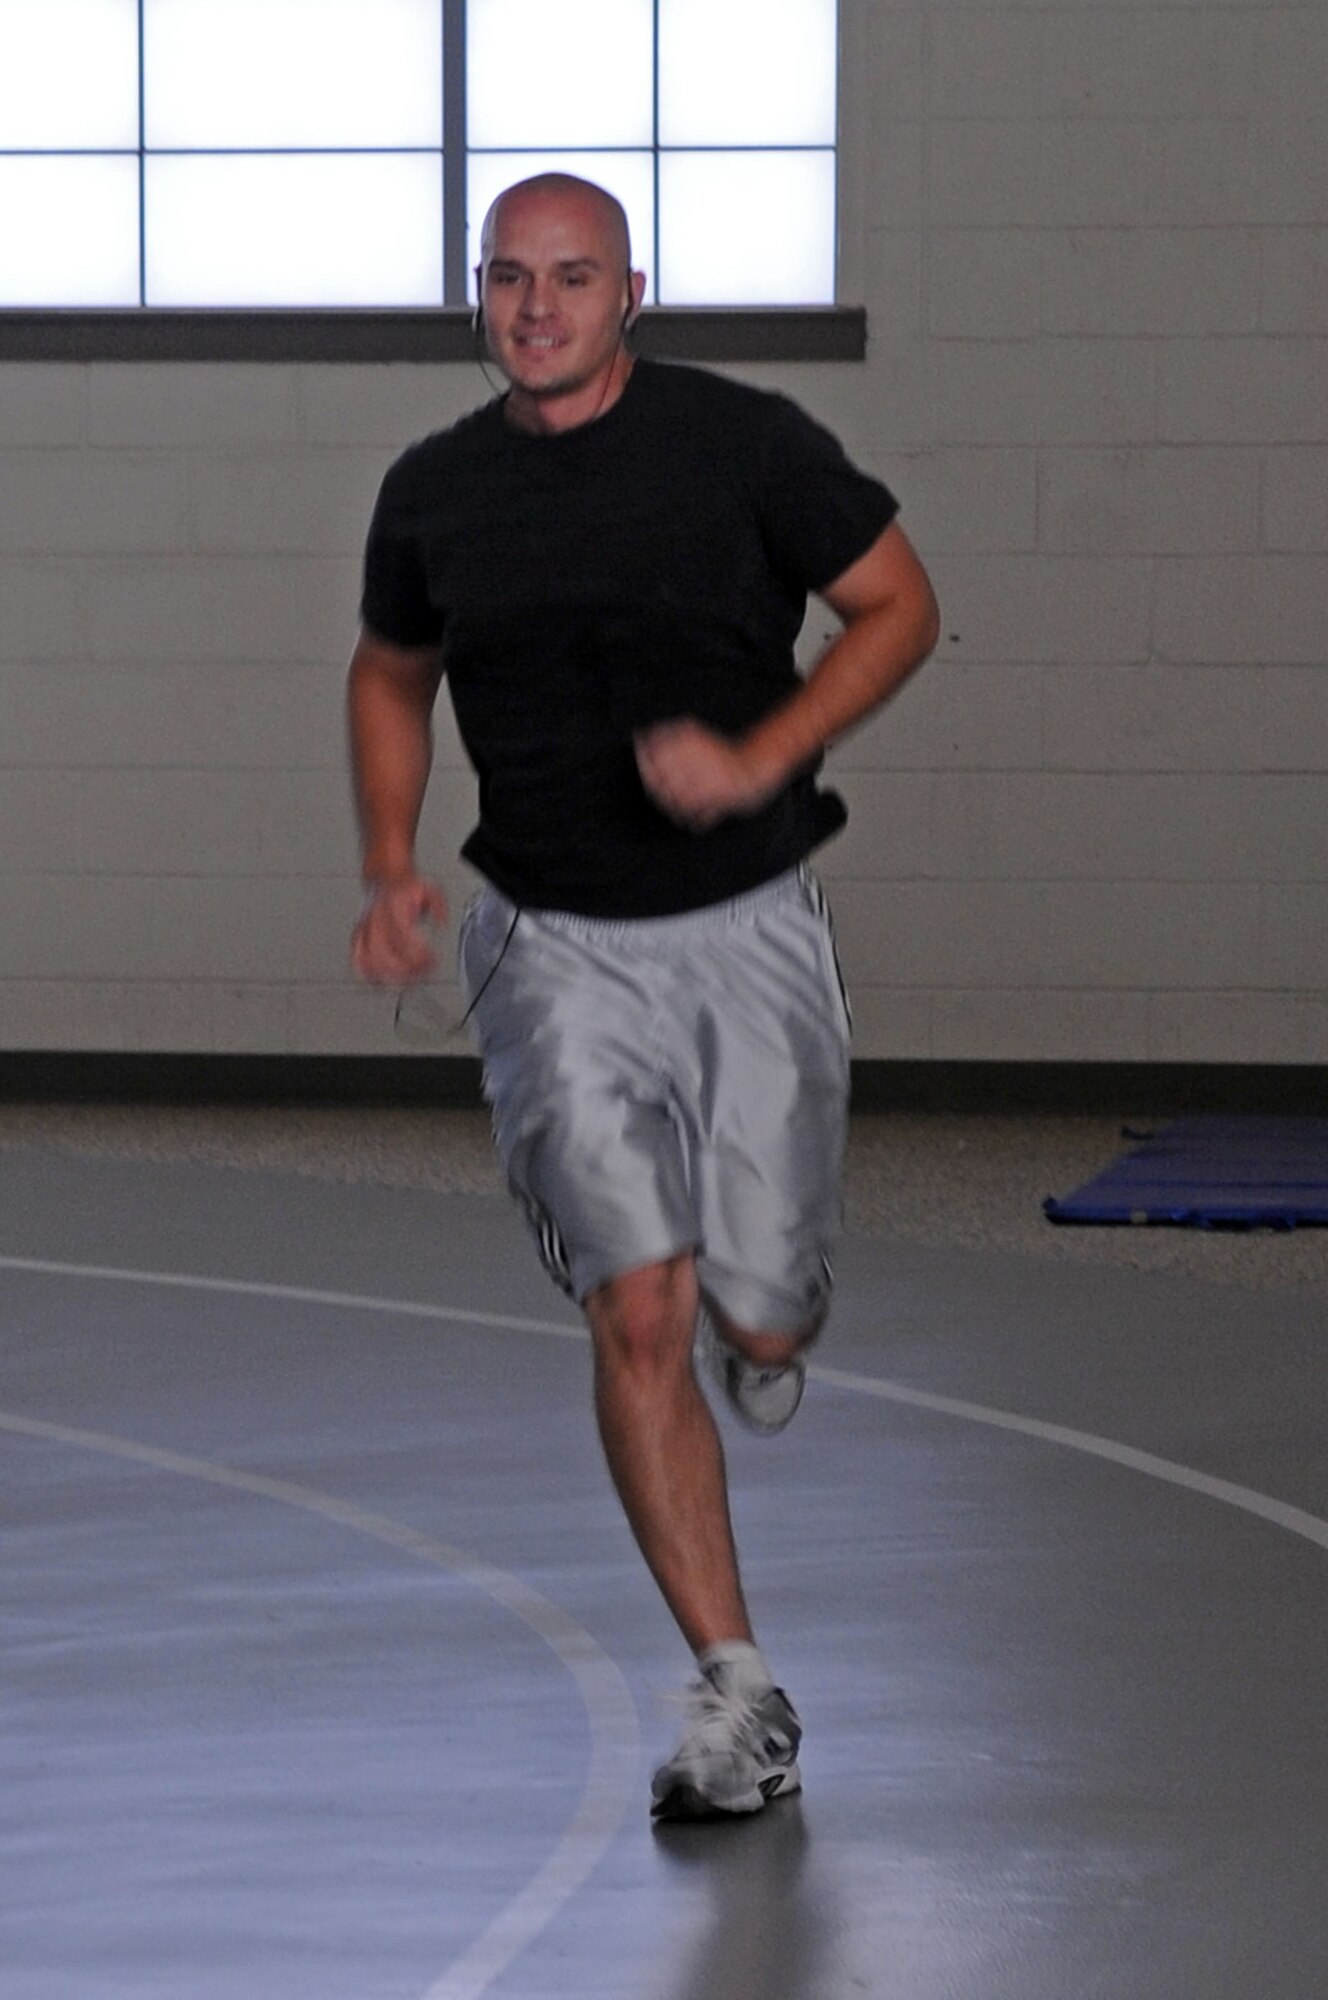 Senior Airman Anthony Chacon, 2d Aircraft Maintenance Squadron, runs around the indoor track in the Barksdale fitness center during his physical training session. (U.S. Air Force photo by Senior Airman La’Shanette V. Garrett) (RELEASED)